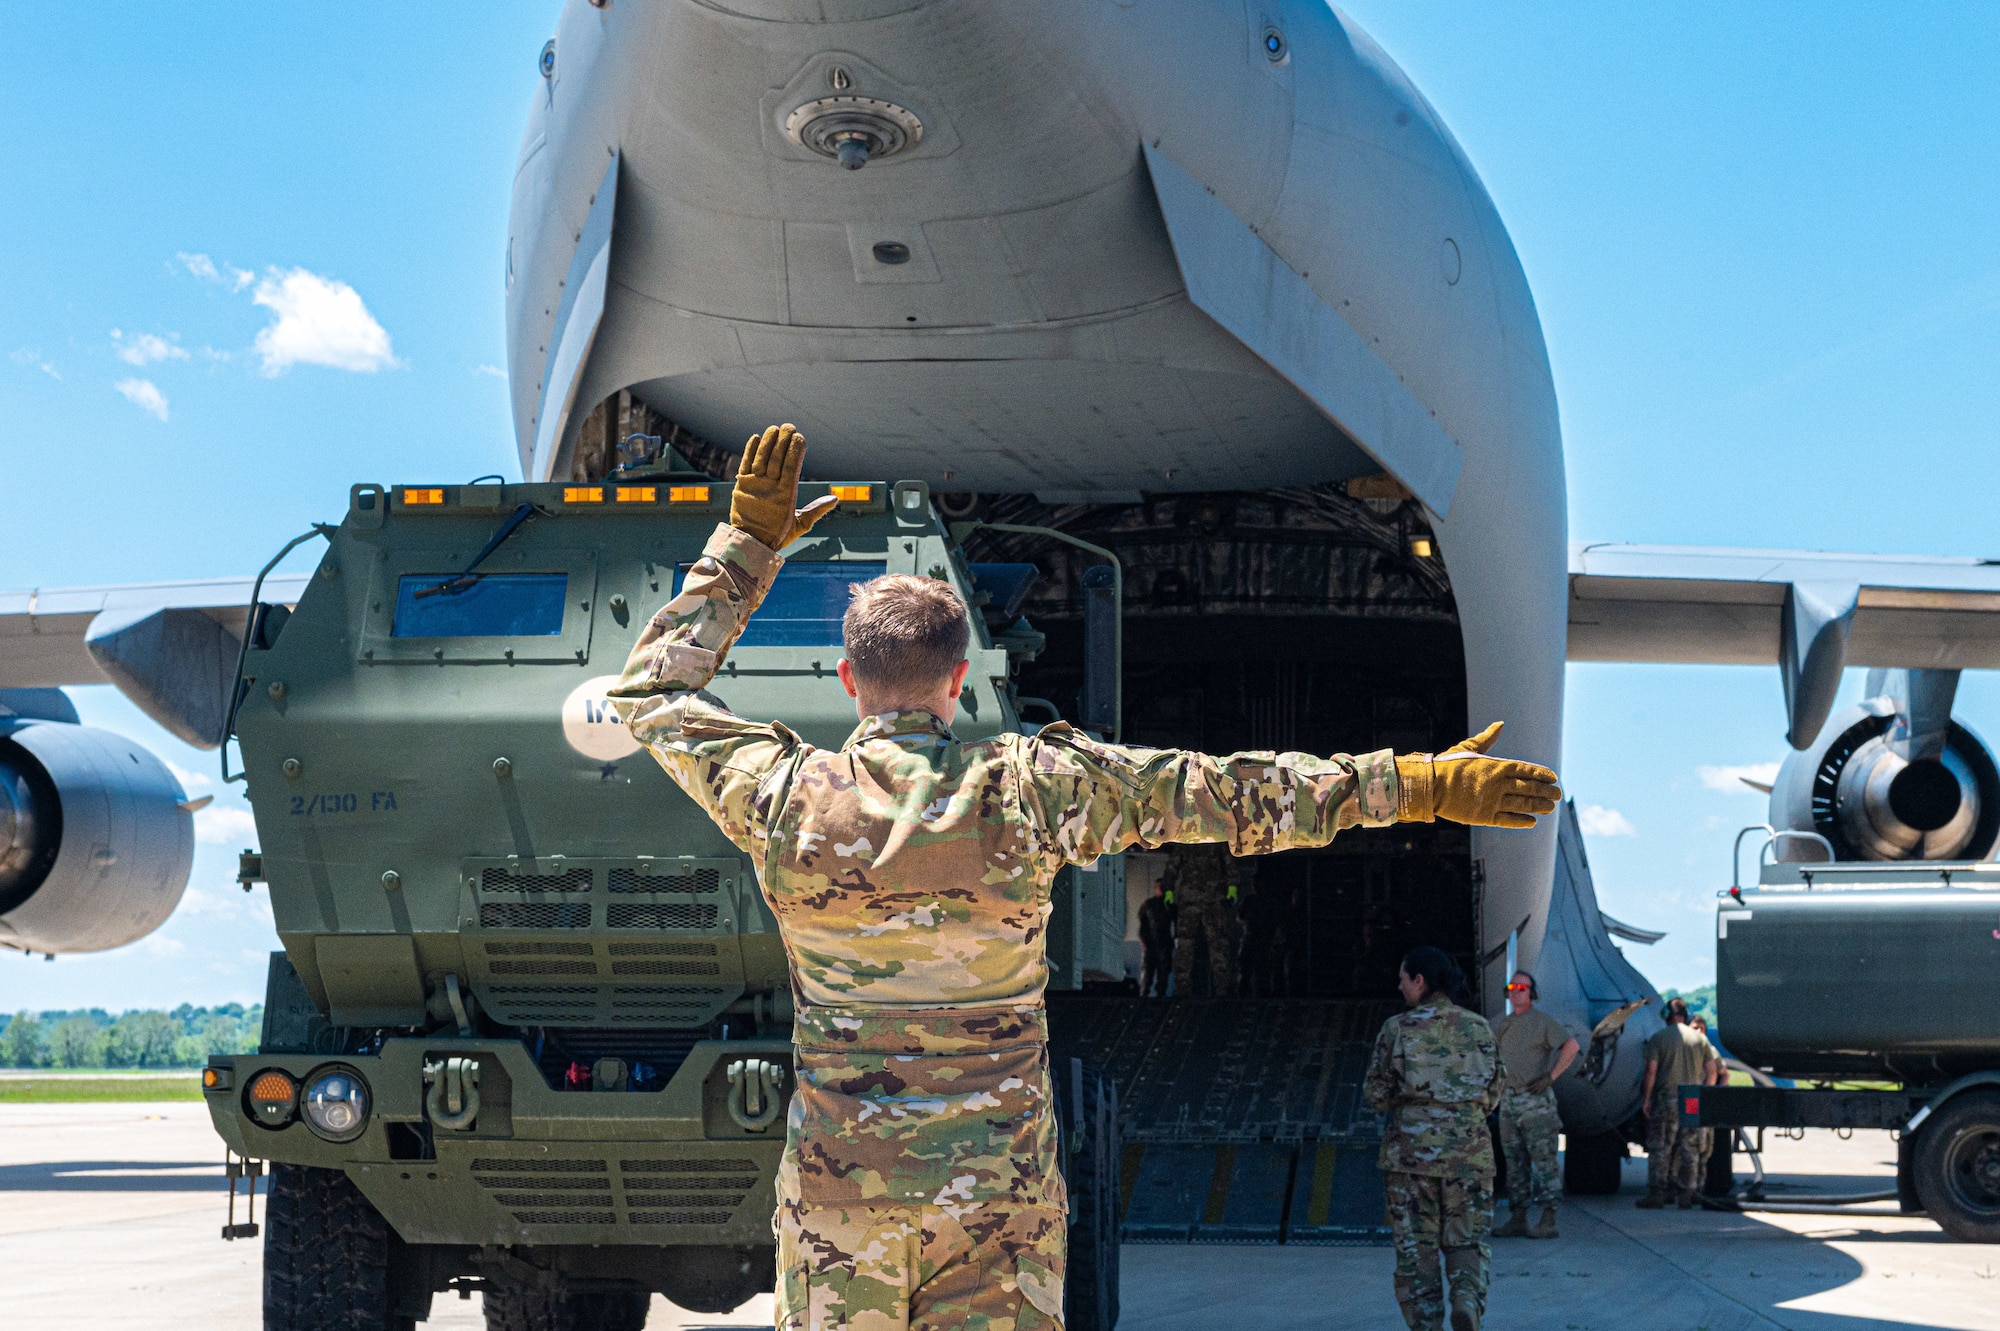 U.S. Airmen with the 105th Airlift Wing, New York National Guard, load an M142 High Mobility Artillery Rocket System, belonging to the 2nd Battalion, 130th Field Artillery Regiment, Kansas Army National Guard, into a C-17 Globemaster III aircraft, at Rosecrans Air National Guard Base, in St. Joseph, Missouri, June 4, 2021.